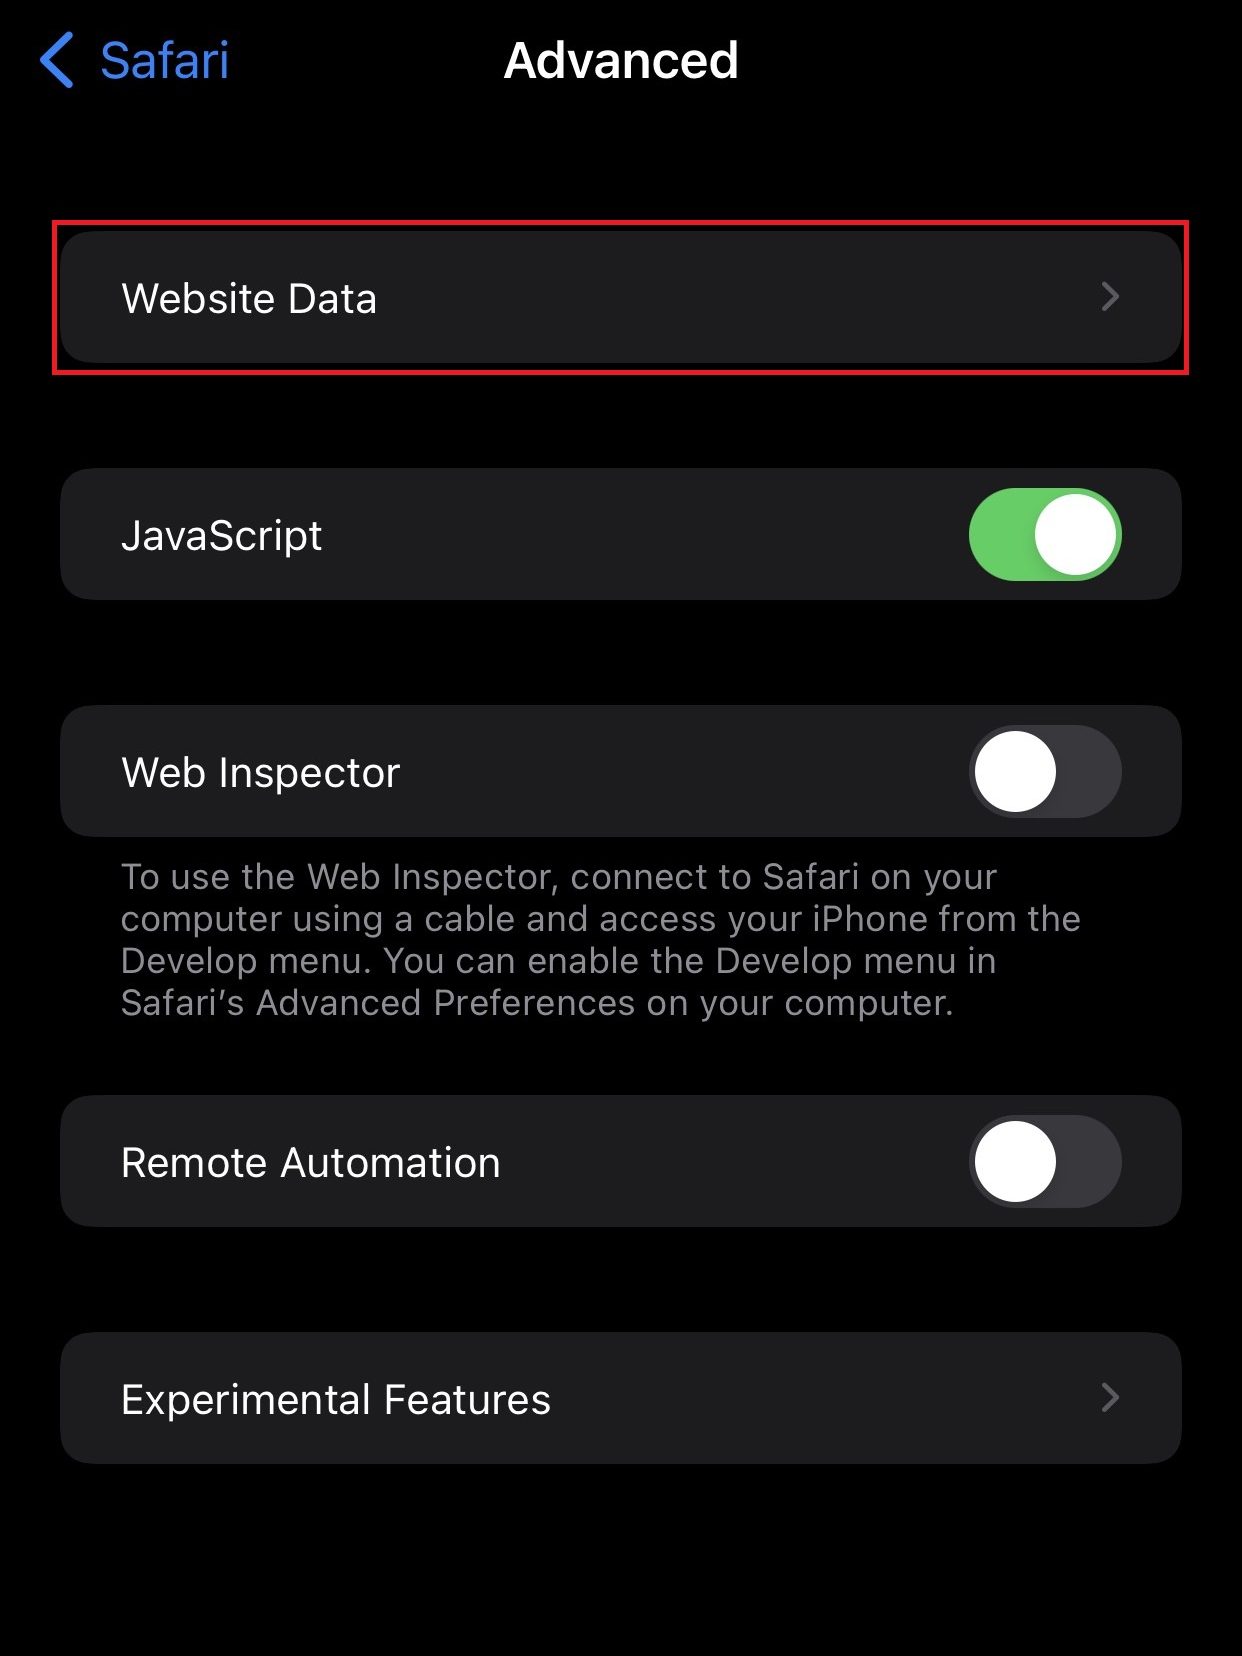 Choose Website Data under Advanced Settings on Safari to clear cache